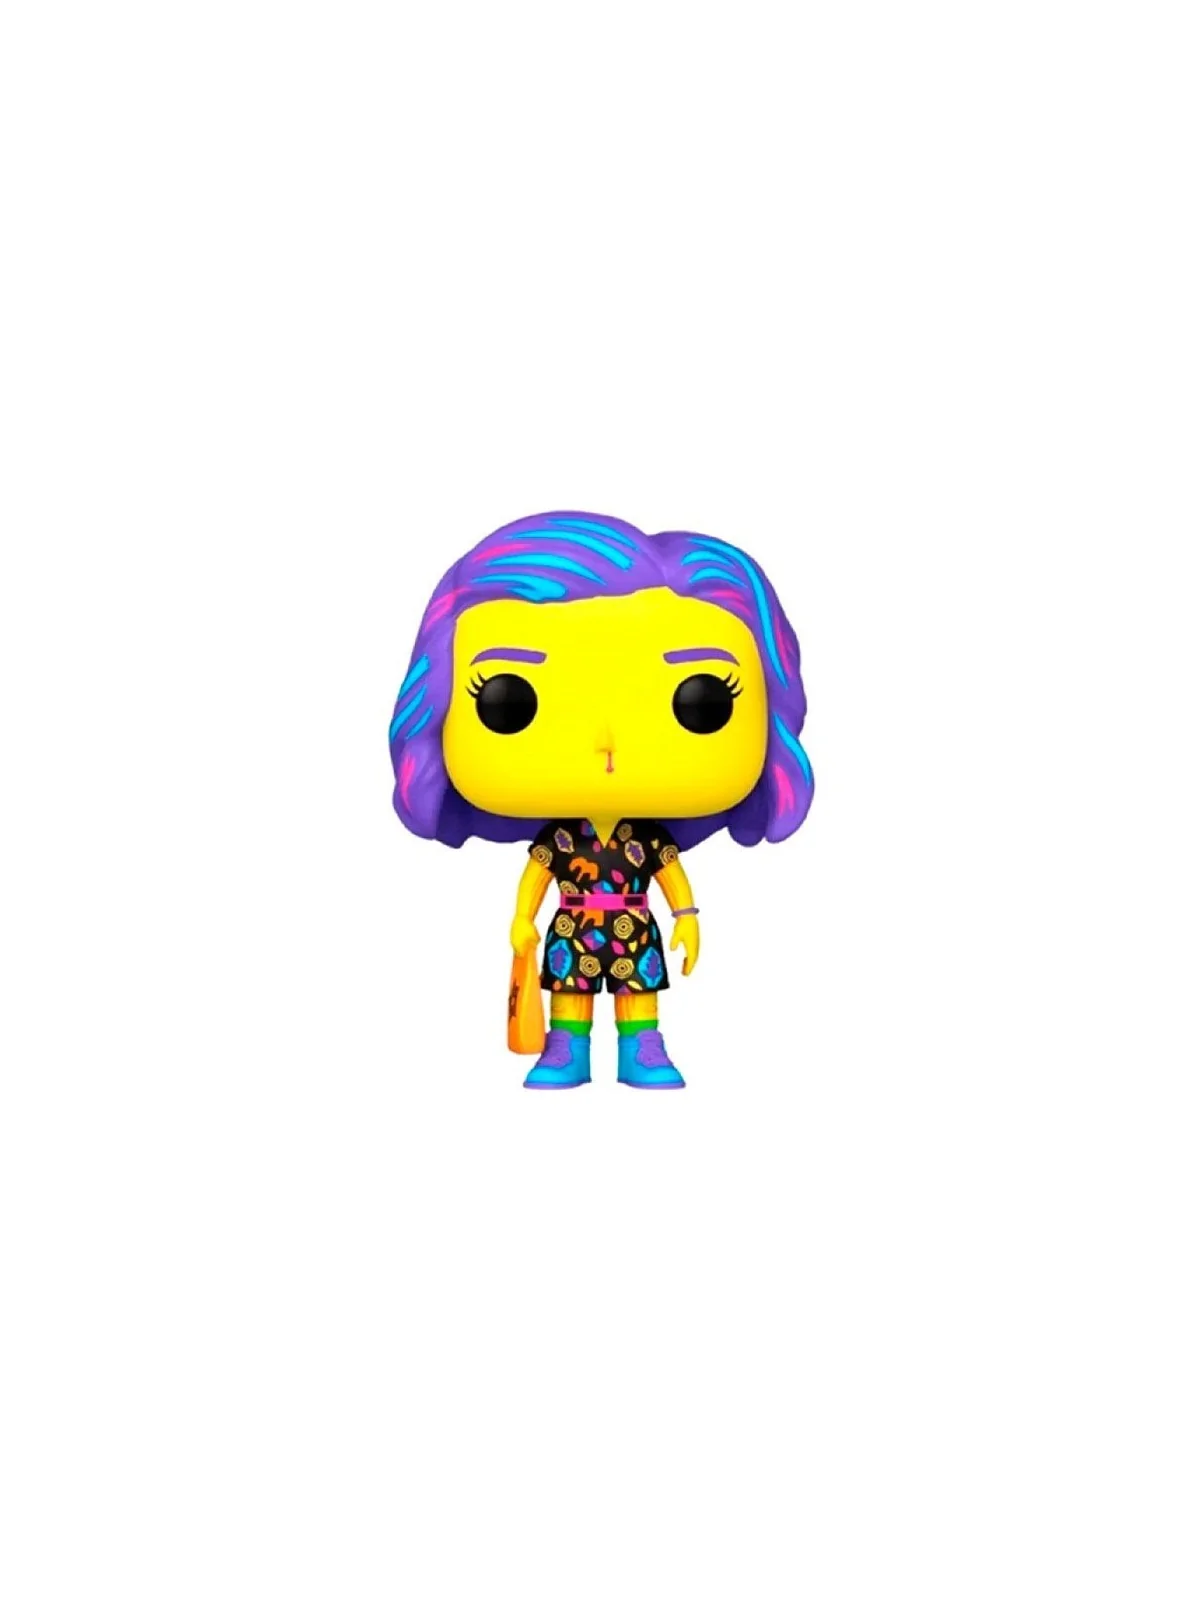 Comprar Funko POP! Stranger Things Eleven in Mall Outfit Black Light E